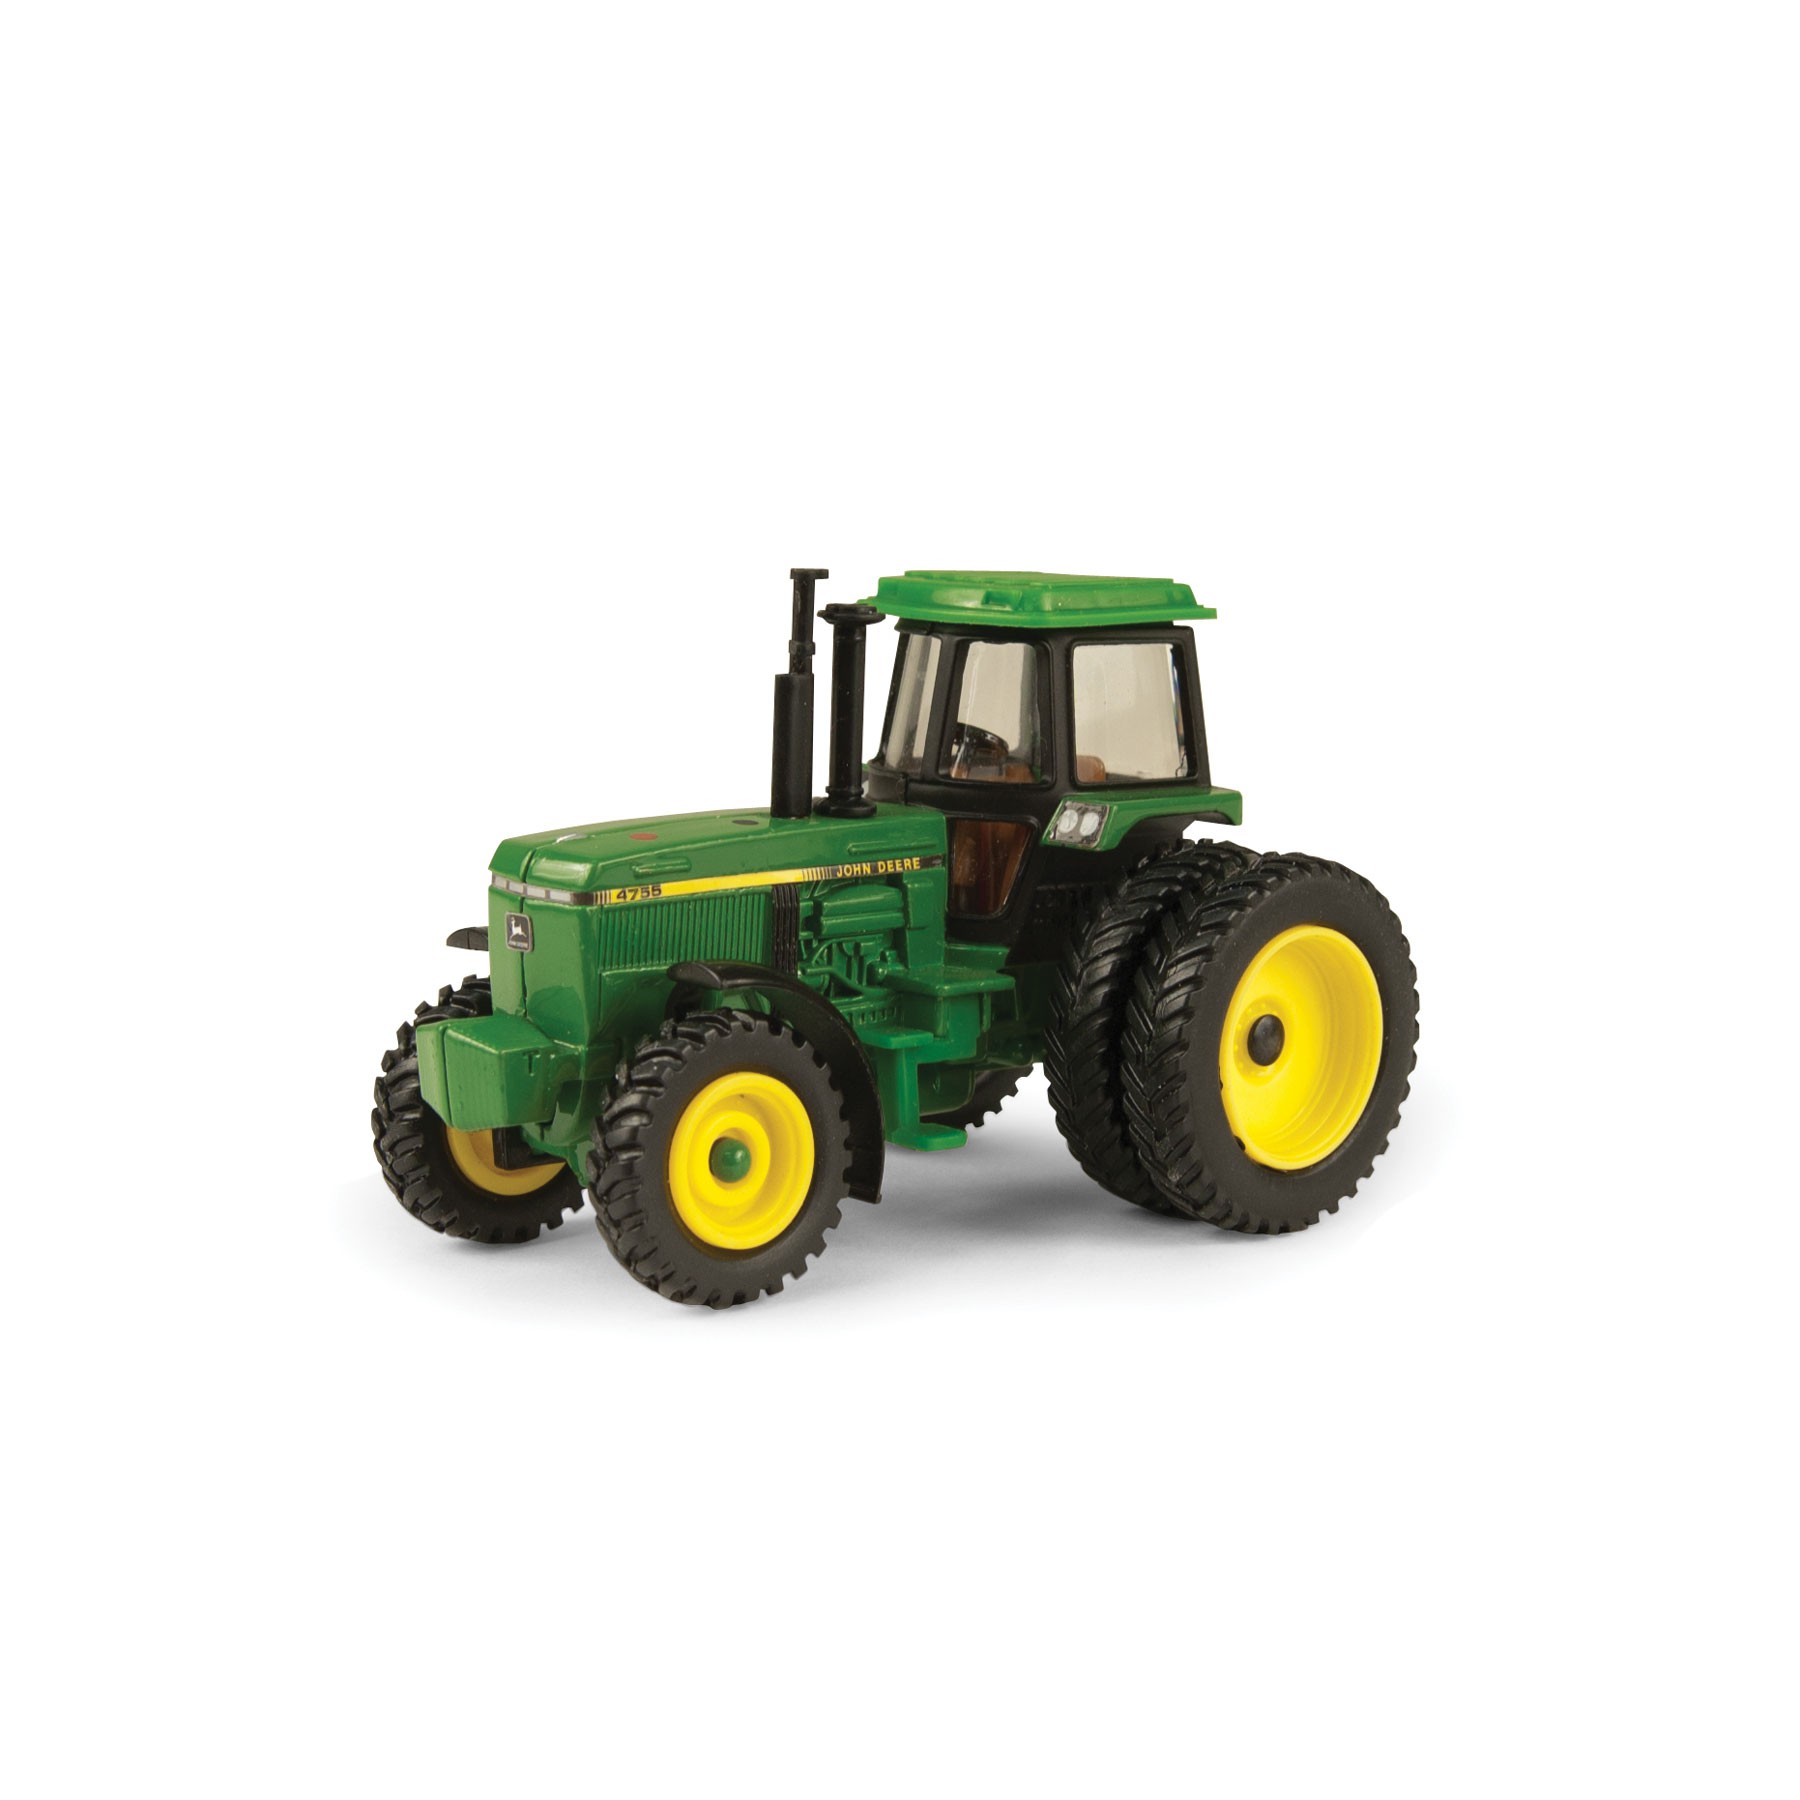 This 1:64 model of the John Deere 4755 cab tractor is perfect for all ...